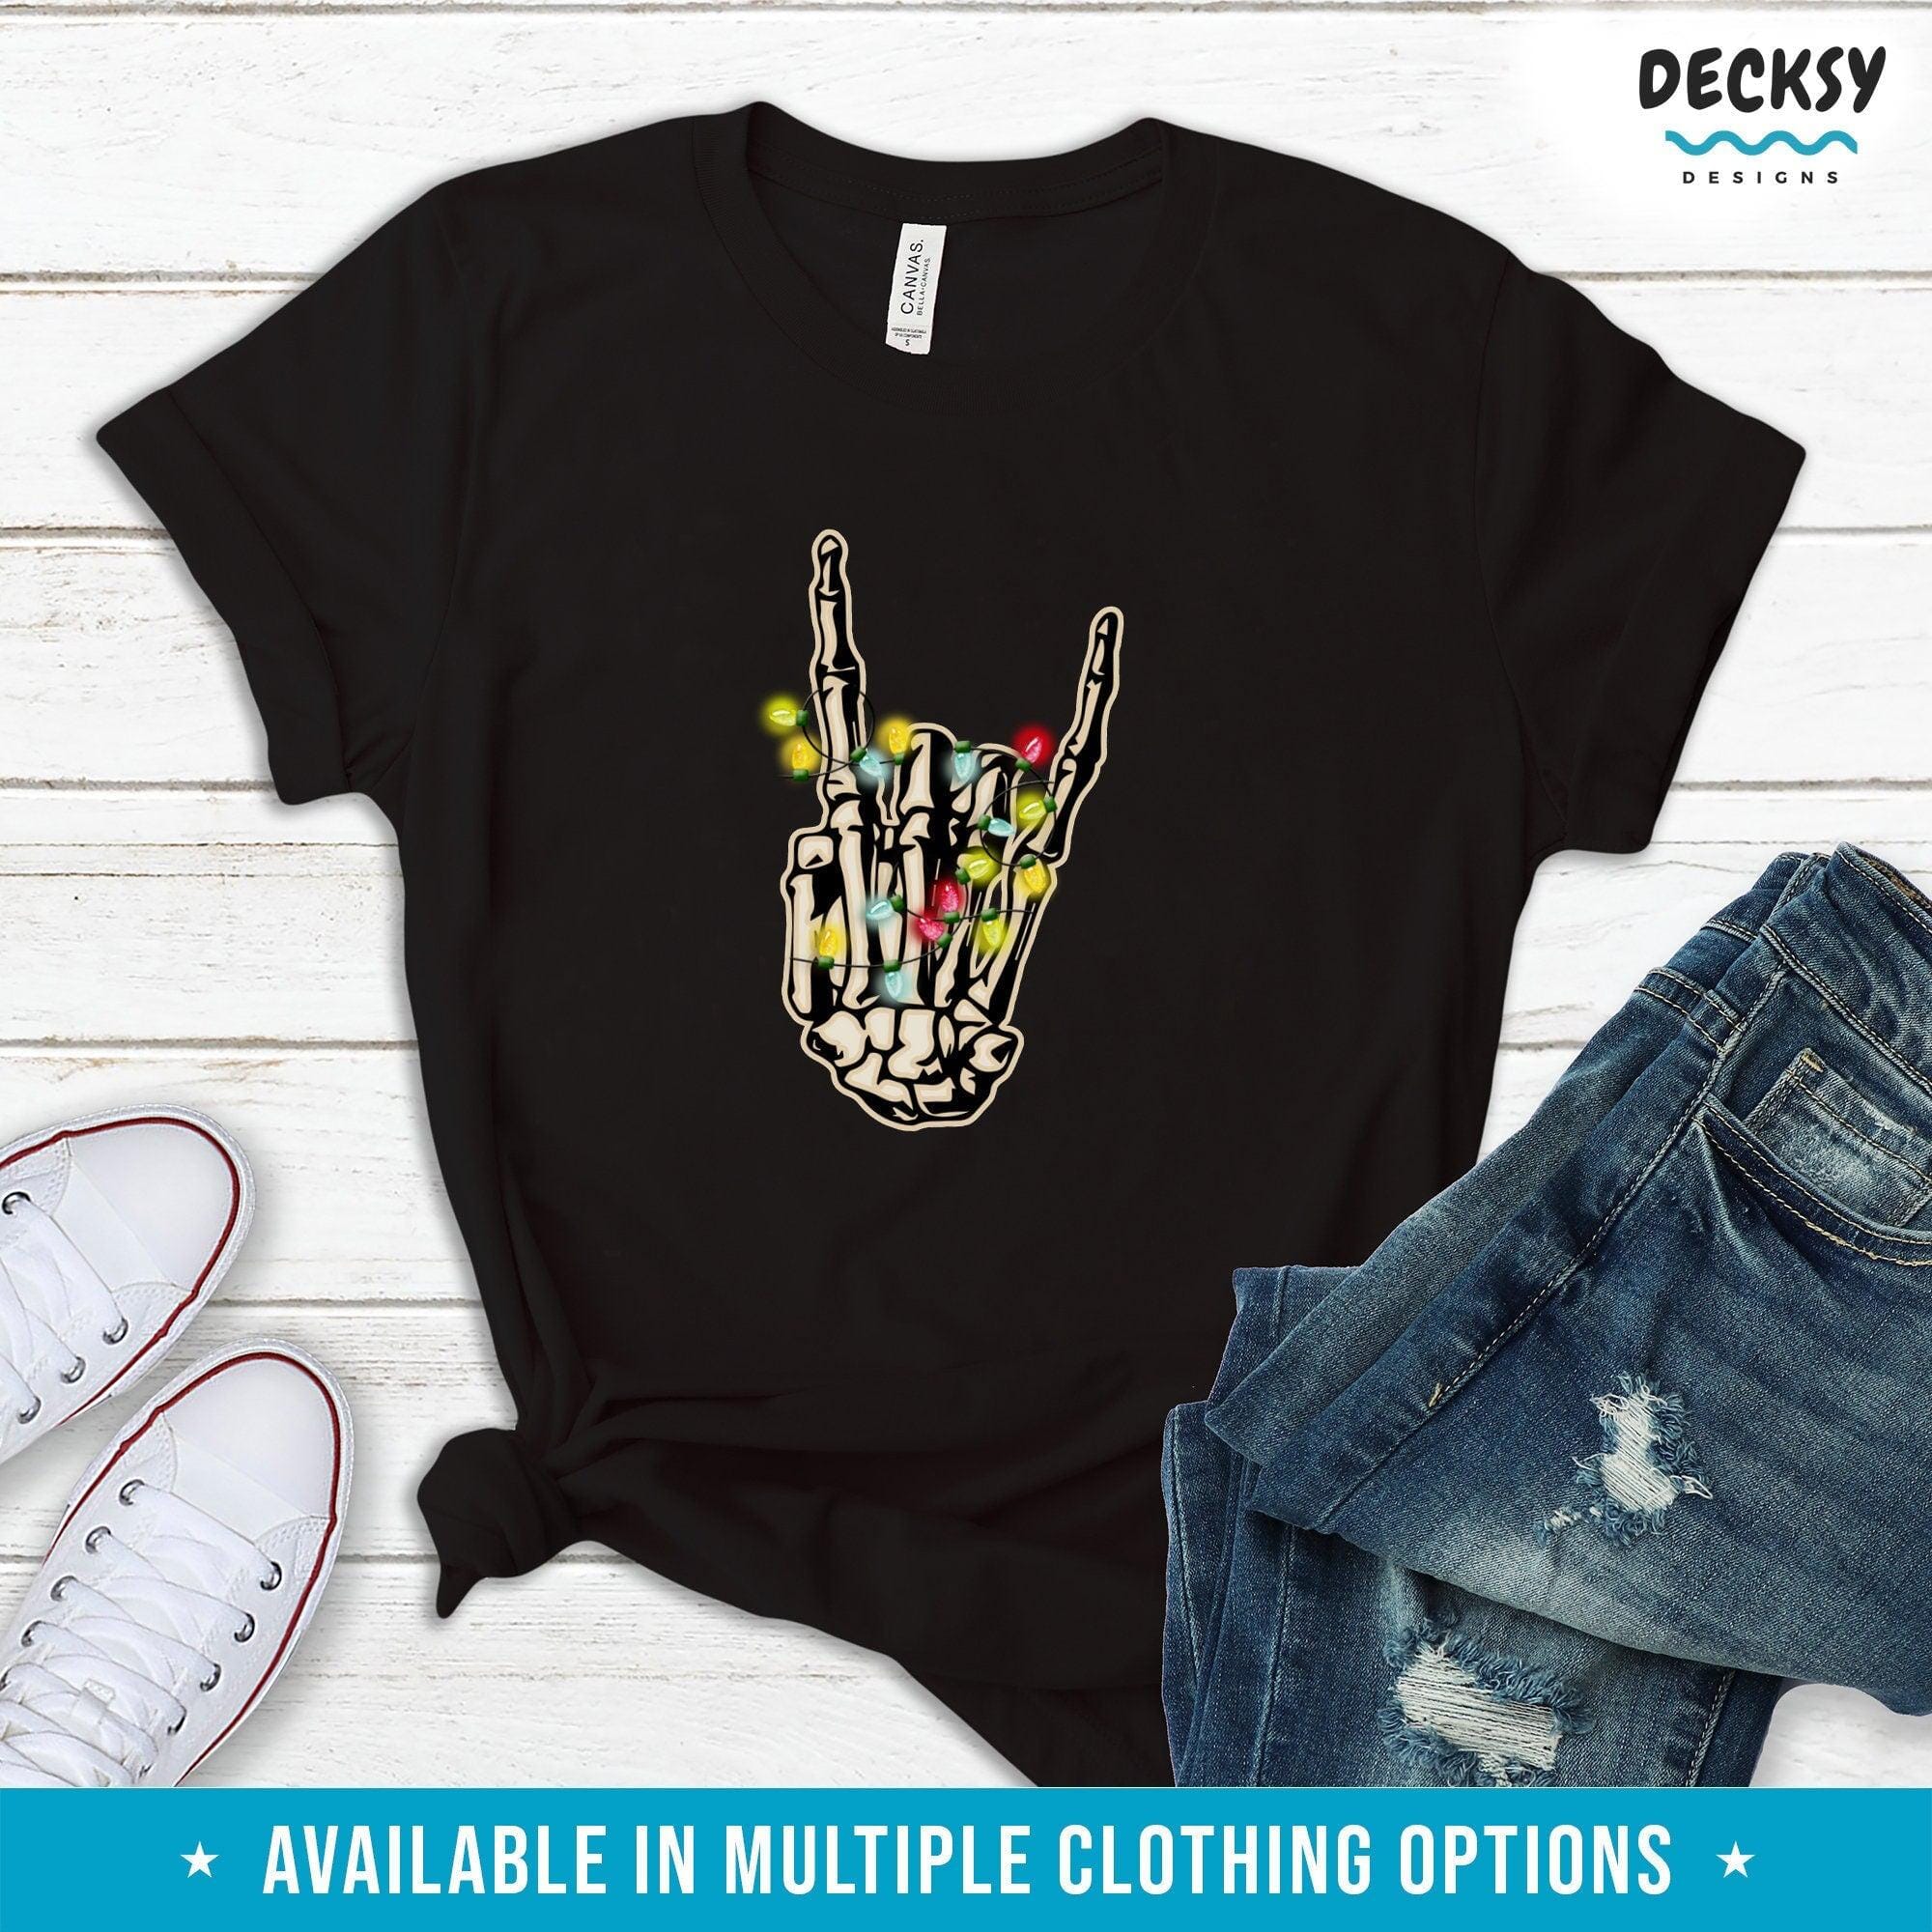 Skeleton Rock On Hand Shirt, Christmas Gift-Clothing:Gender-Neutral Adult Clothing:Tops & Tees:T-shirts:Graphic Tees-DecksyDesigns